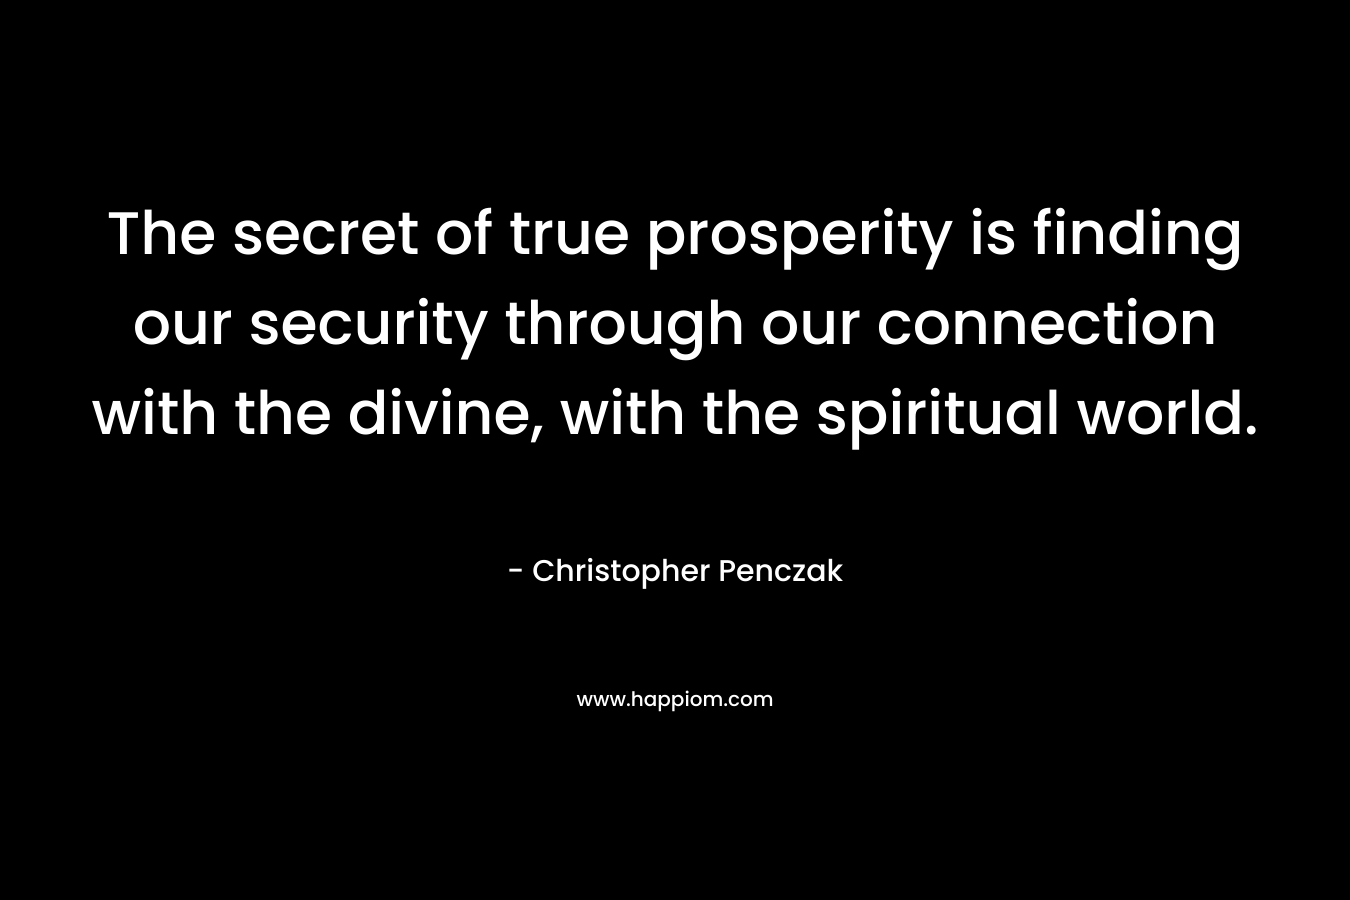 The secret of true prosperity is finding our security through our connection with the divine, with the spiritual world.